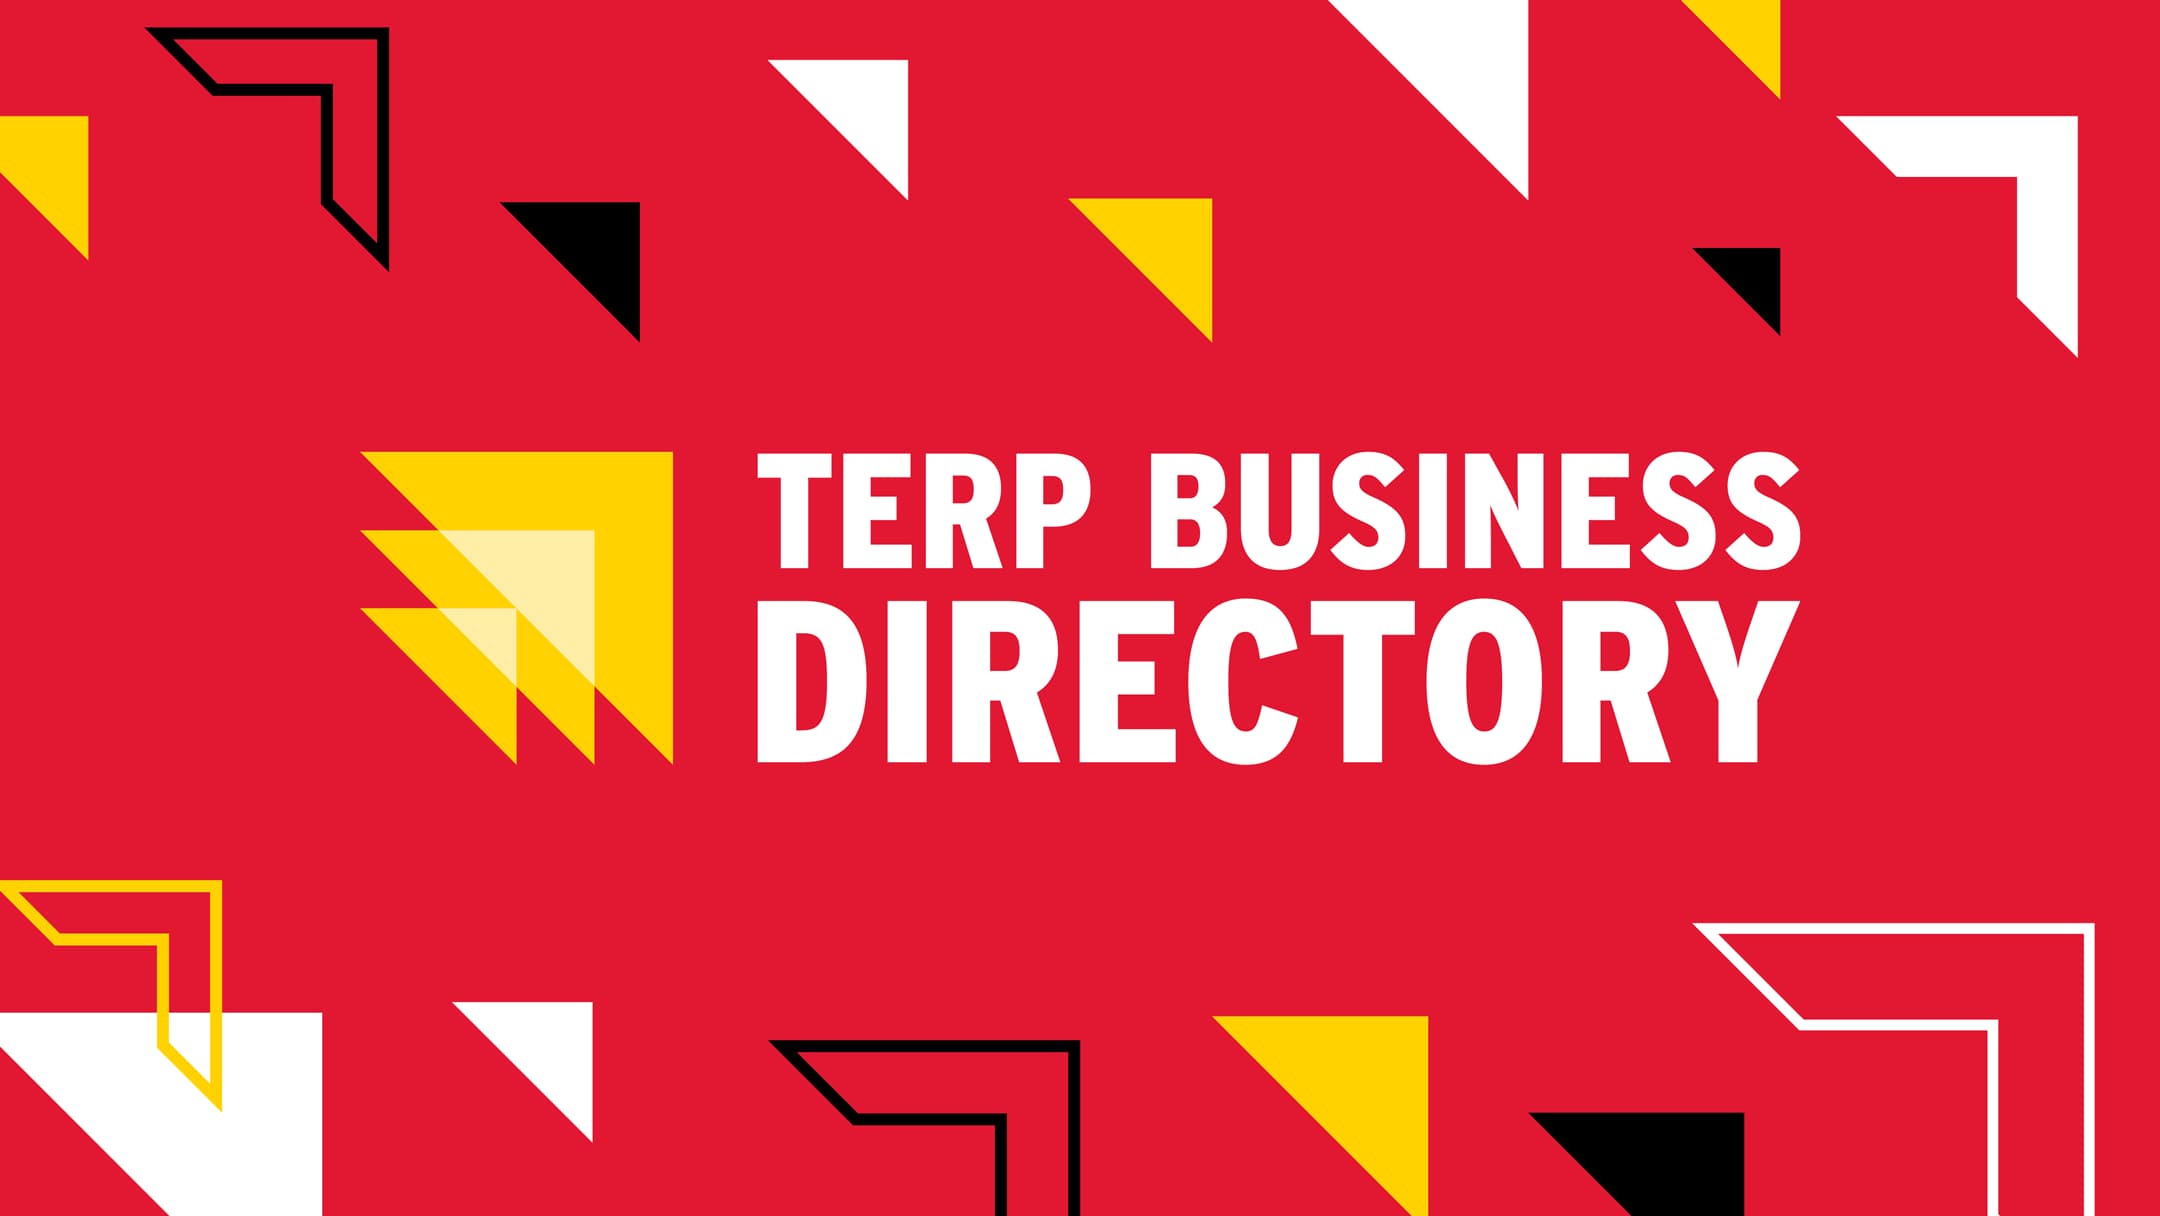 Terp Business Directory graphic